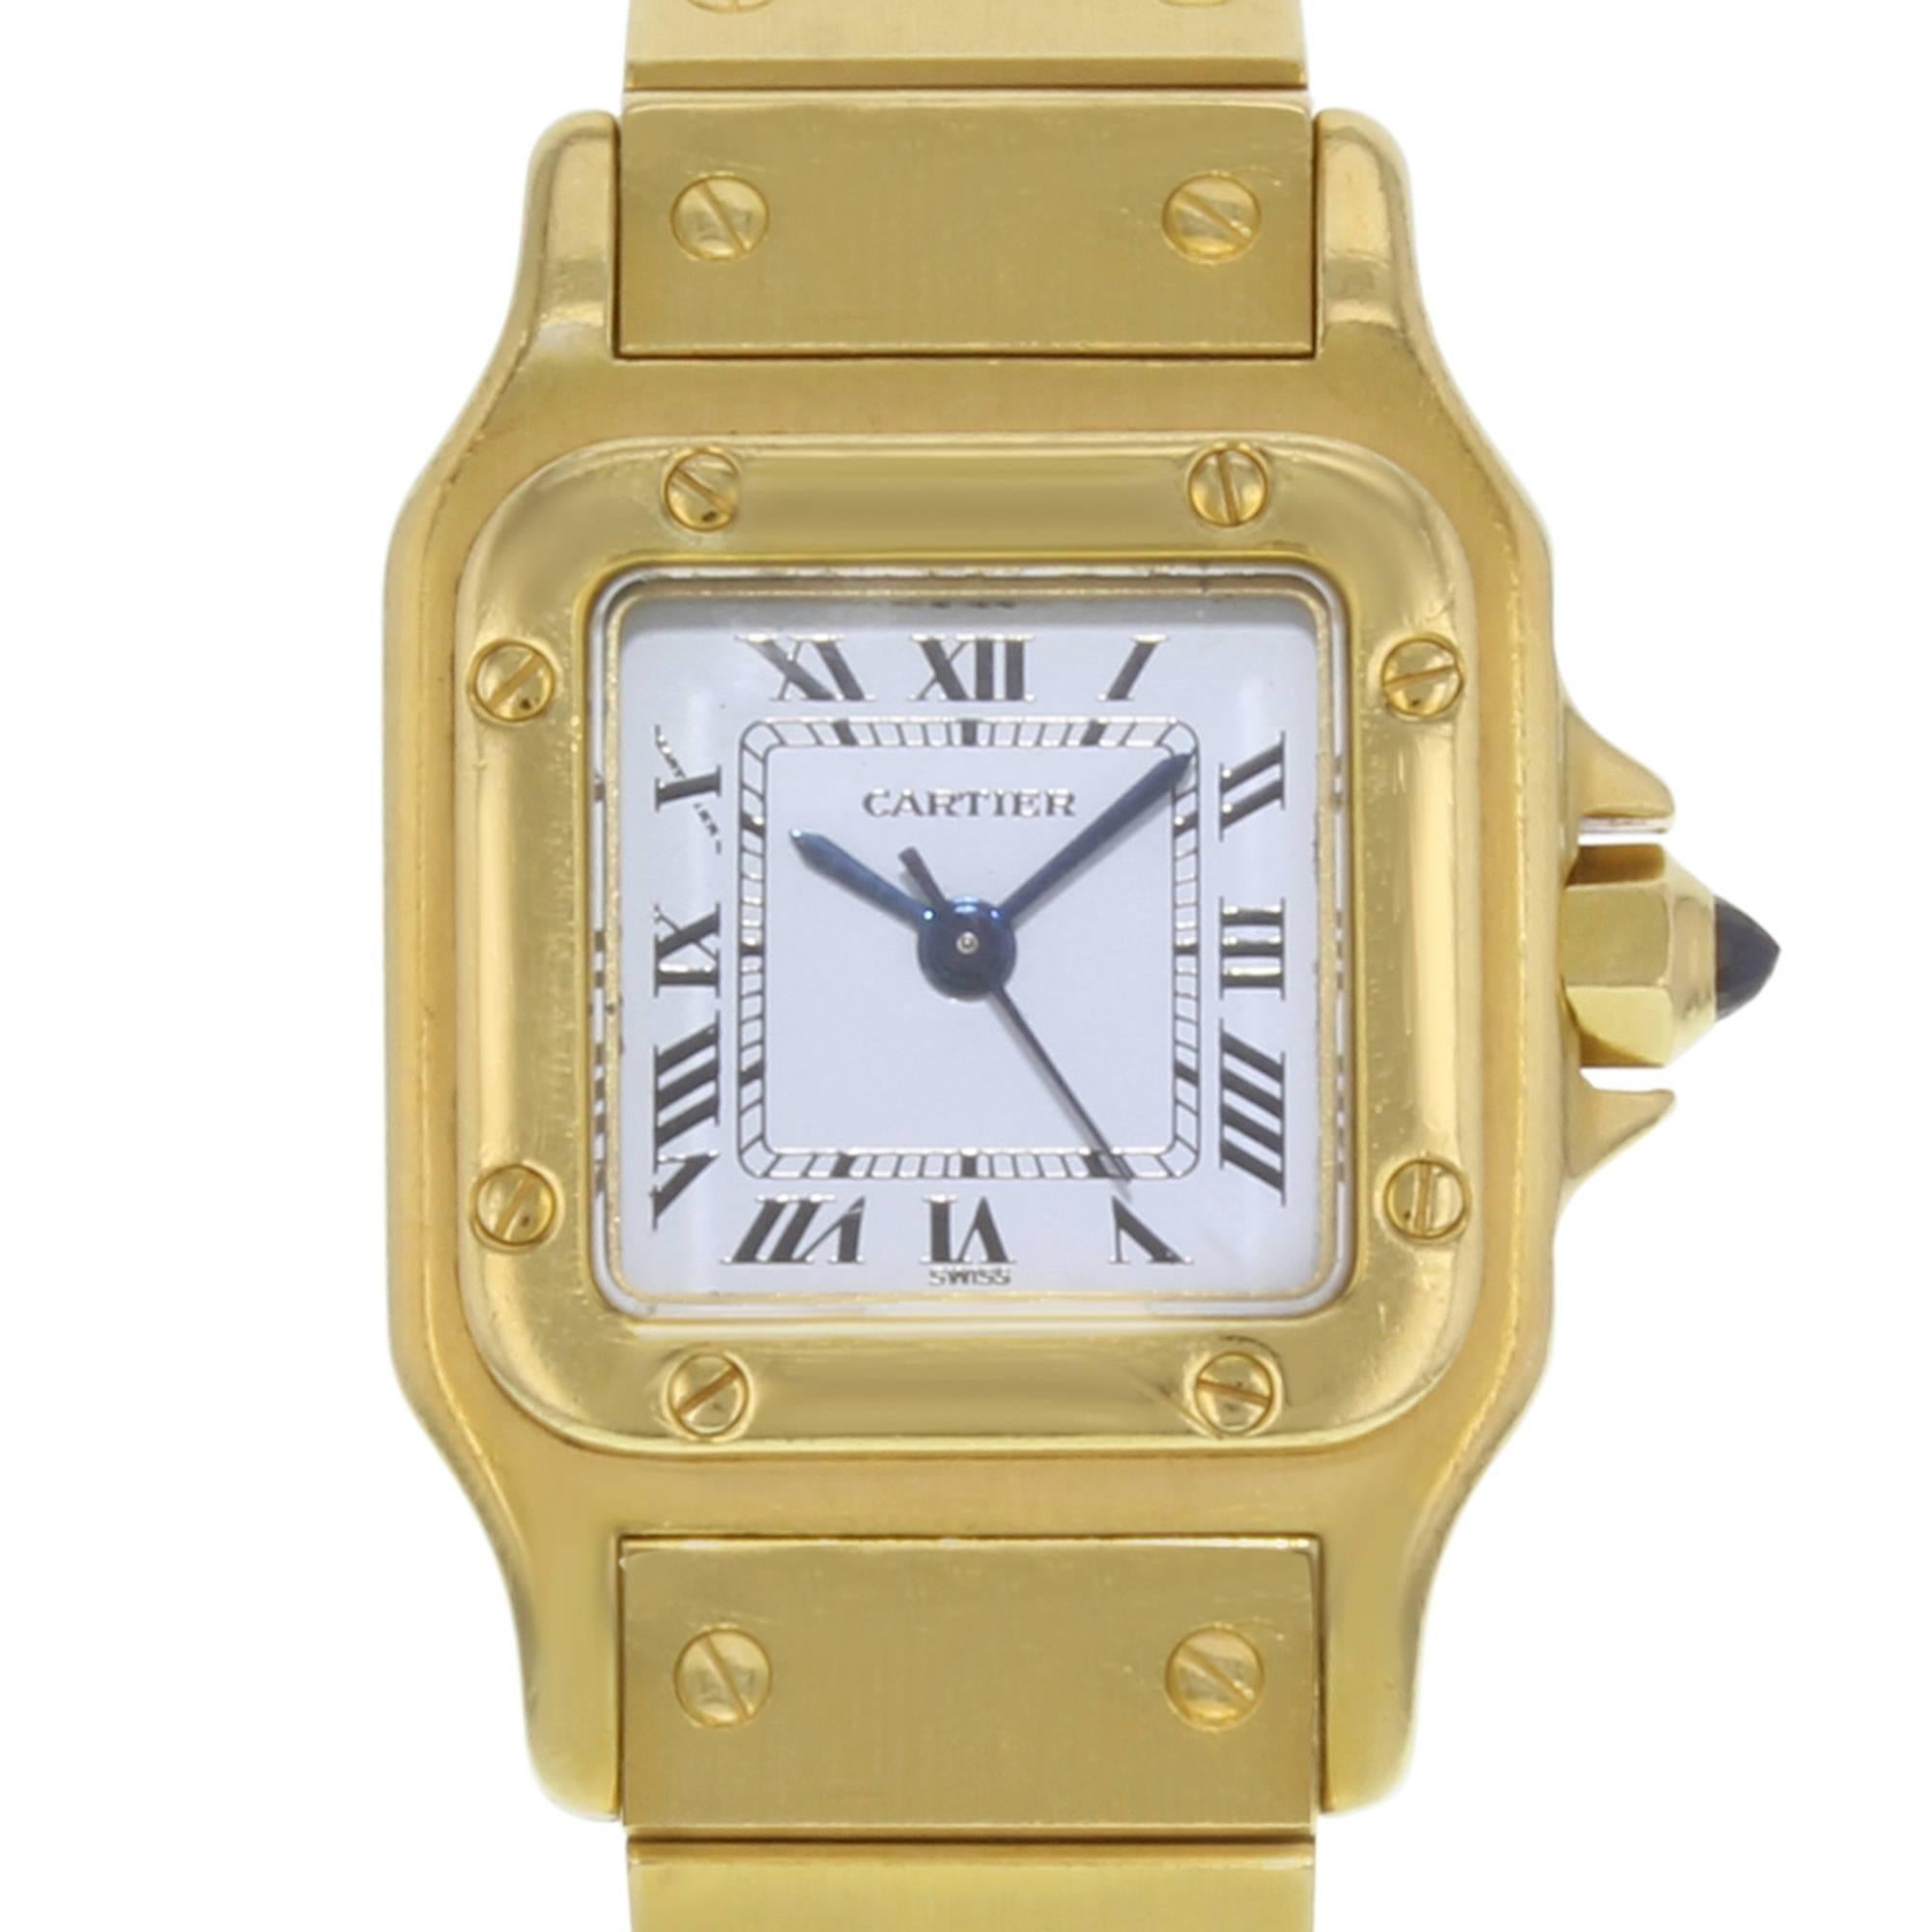 This pre-owned Cartier Santos N/A is a beautiful Ladies timepiece that is powered by an automatic movement which is cased in a yellow gold case. It has a square shape face, no features dial and has hand roman numerals style markers. It is completed